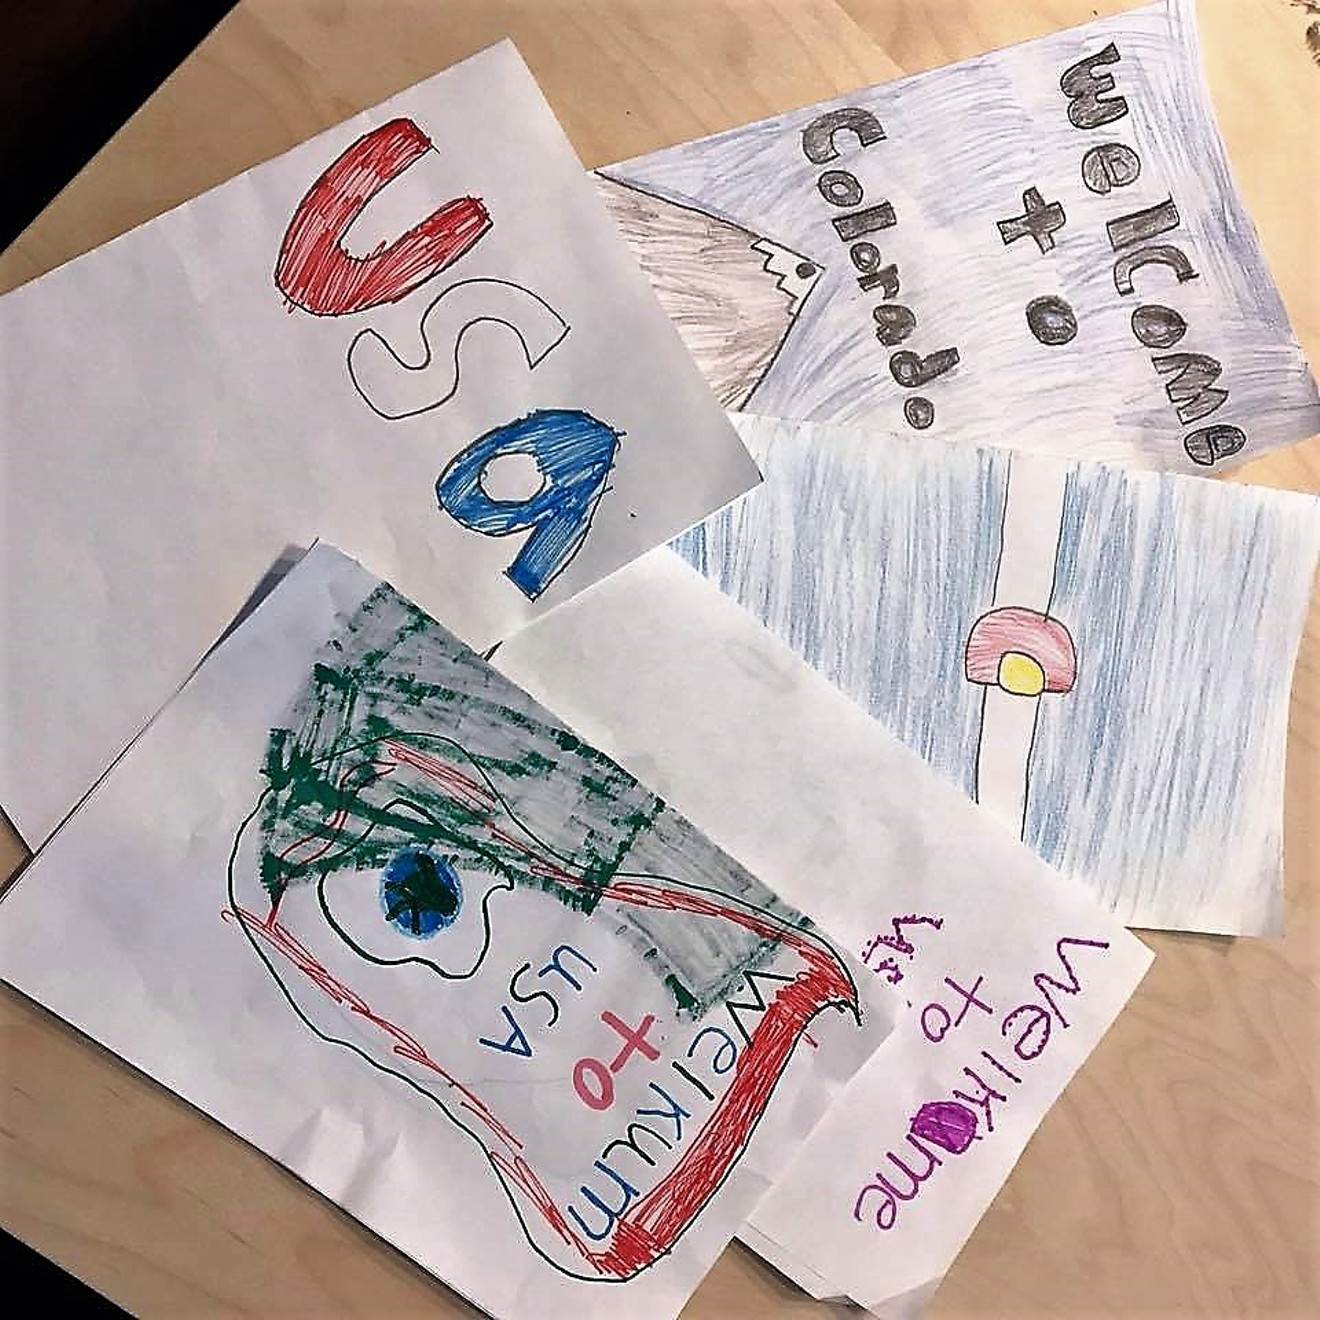 Cards that Colorado kids made for detained parents in Aurora's immigrant detention center.